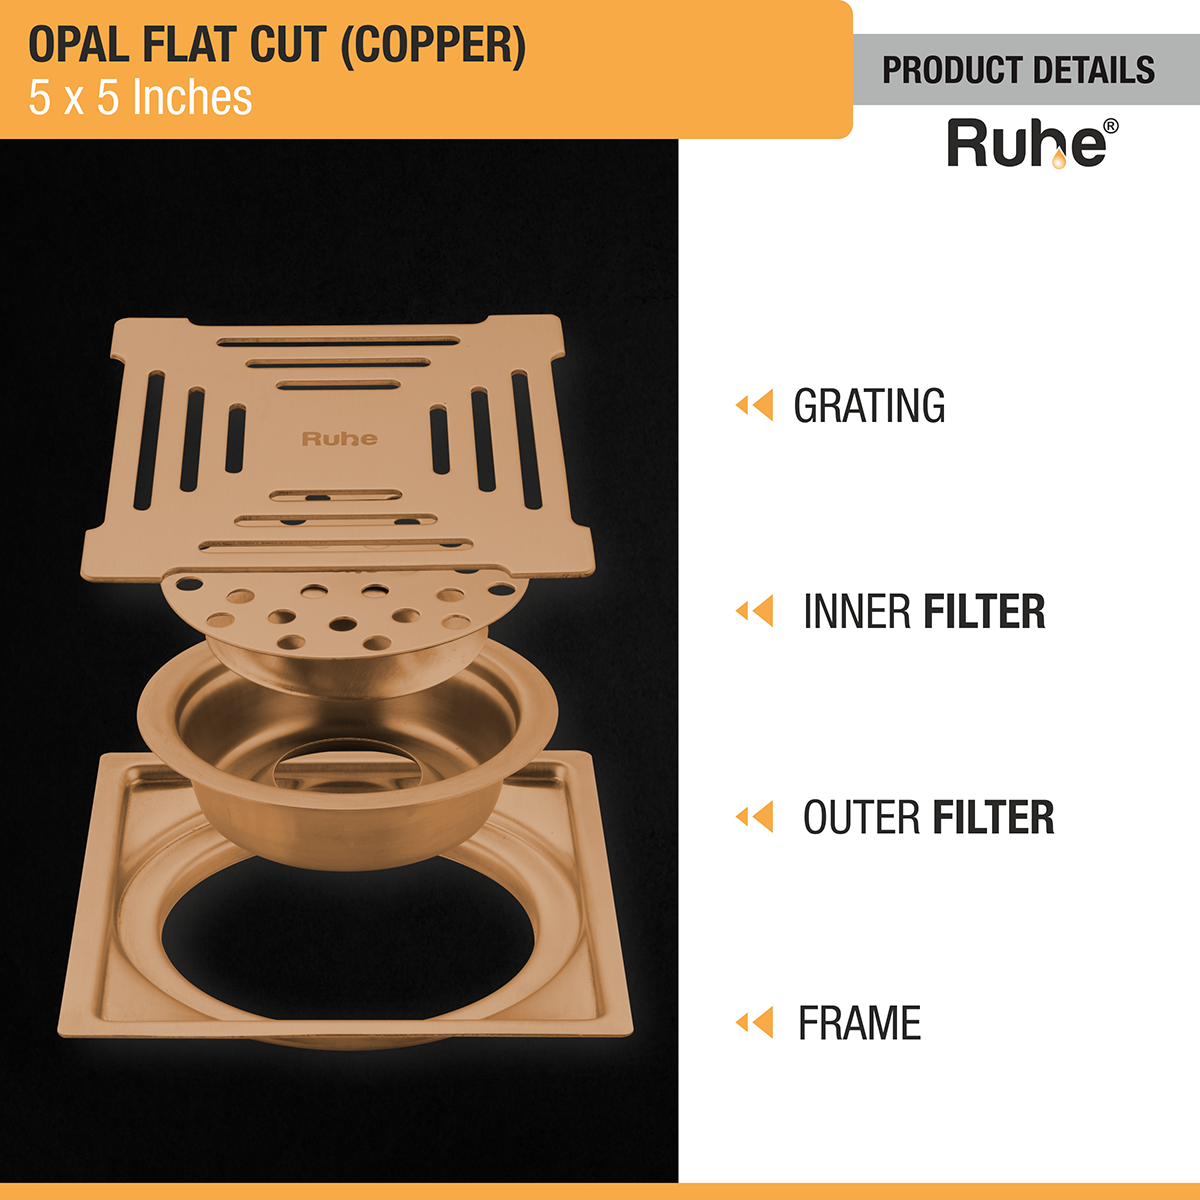 Opal Square Flat Cut Floor Drain in Antique Copper PVD Coating (5 x 5 Inches) product details